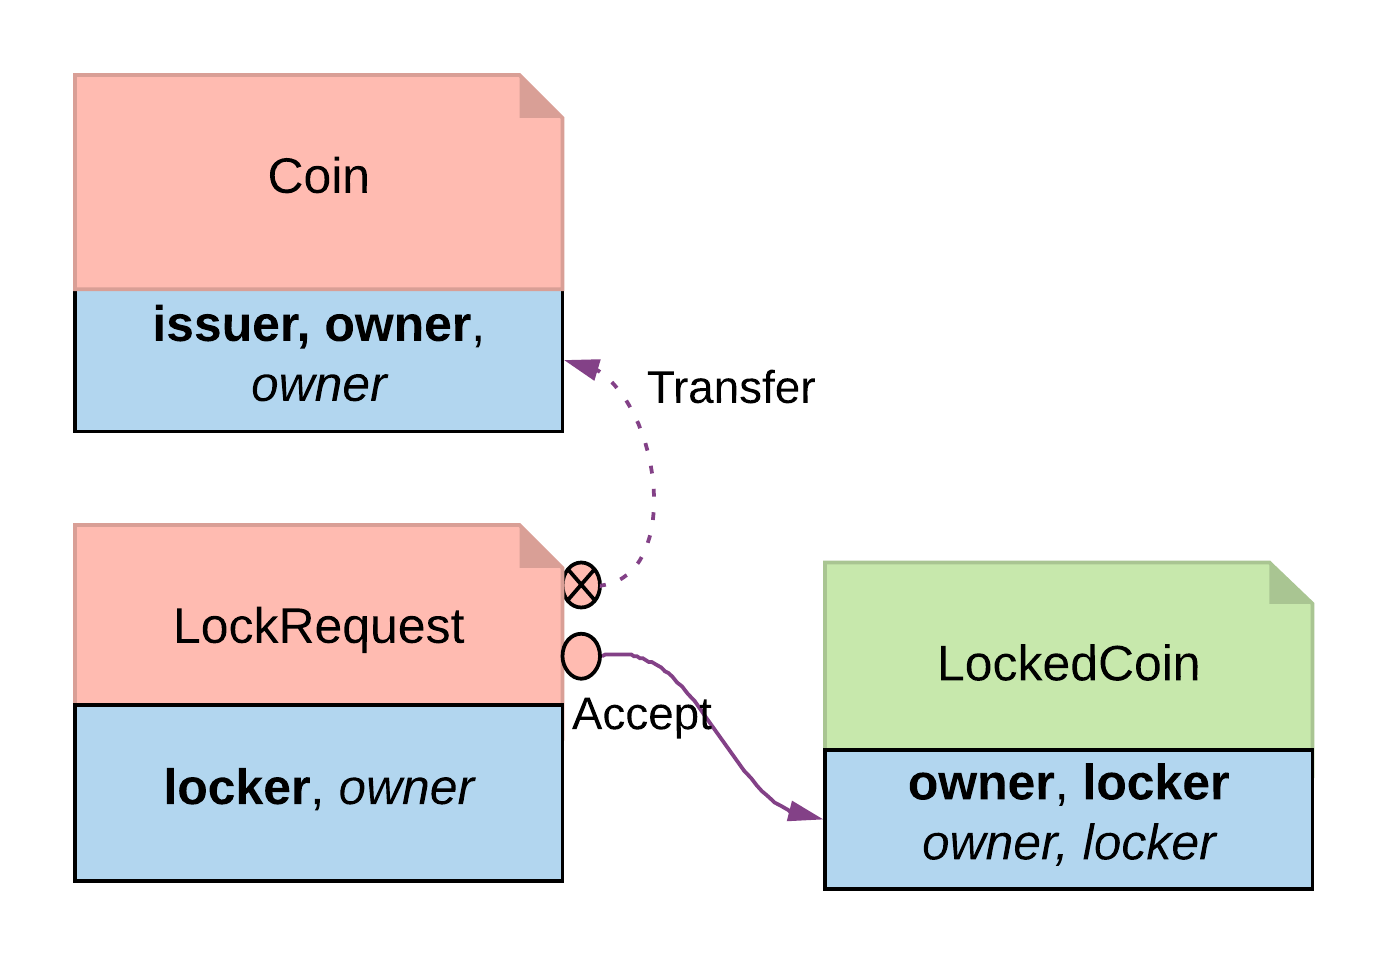 Locking by Safekeeping diagram, showing the ownership transfer of Coin and the creation of LockedCoin